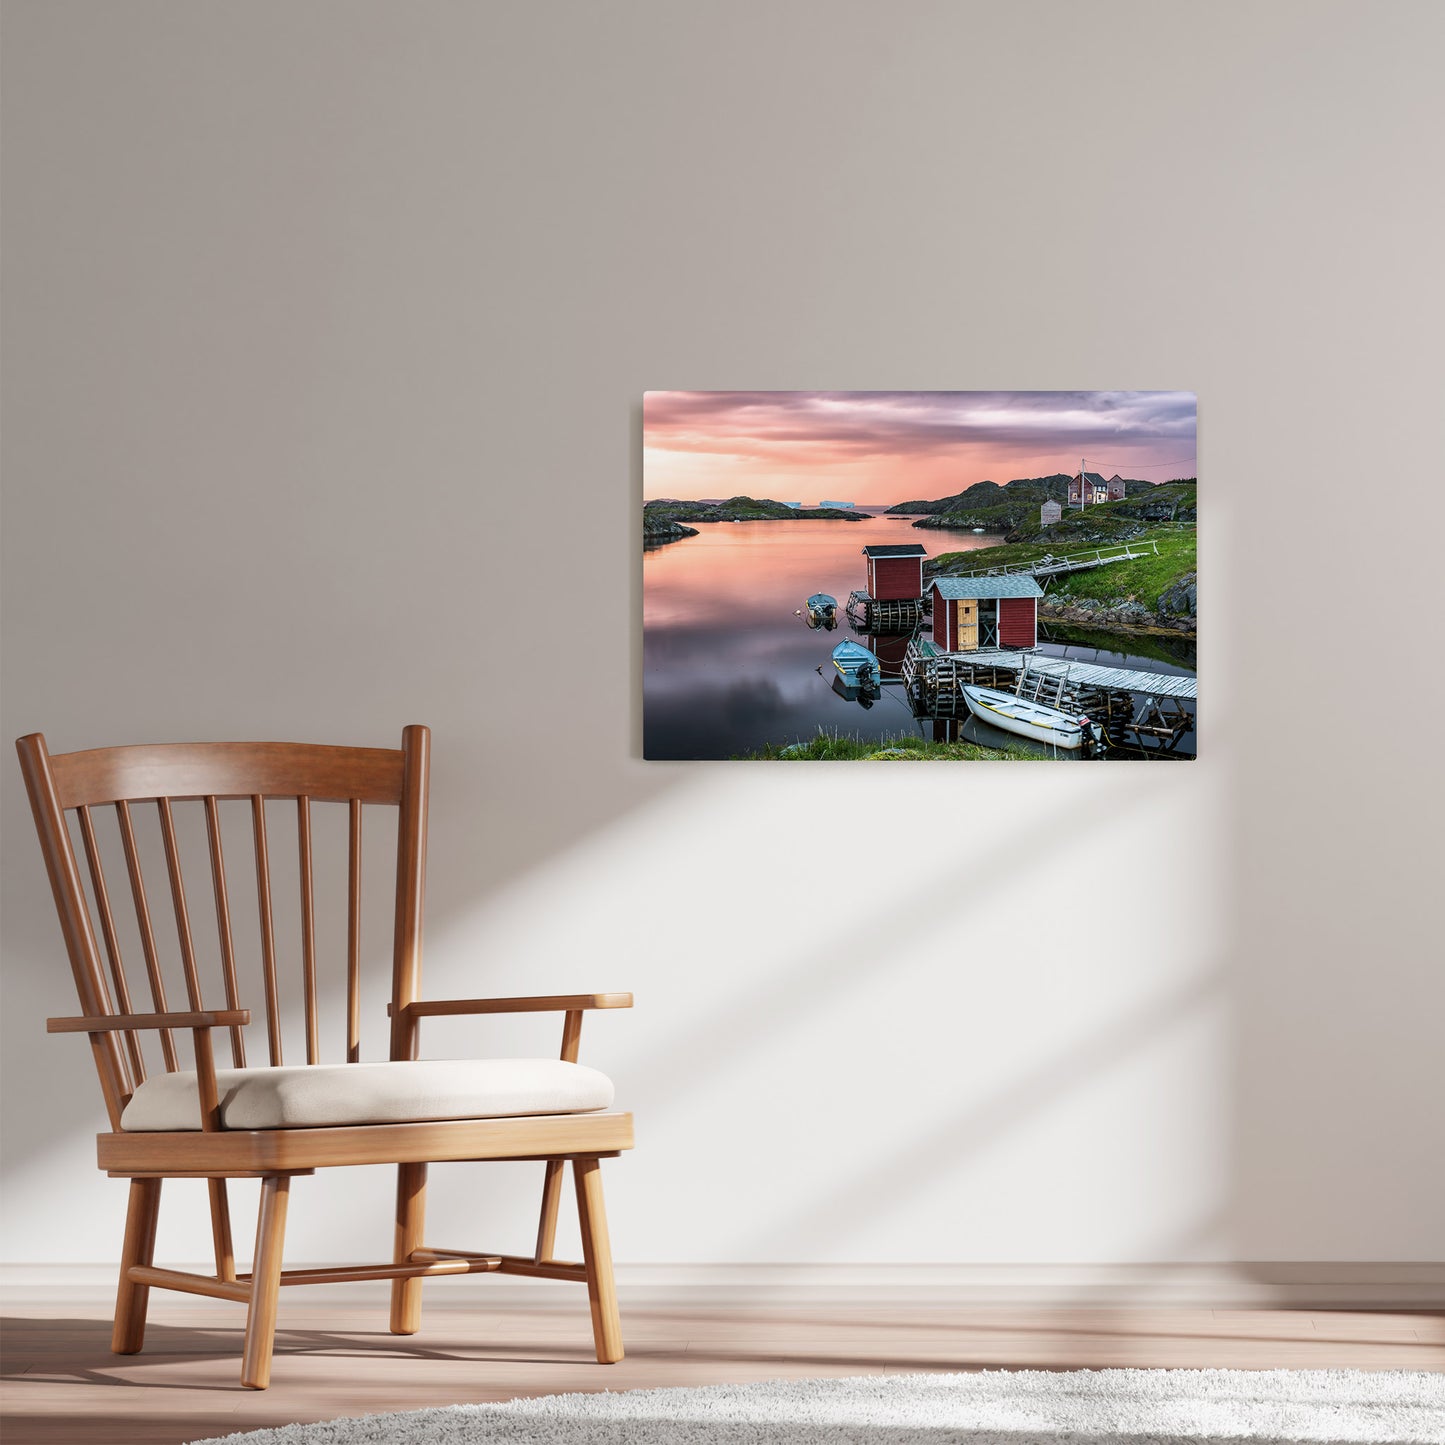 Ray Mackey's Change Islands Stages photography reproduced on HD metal print and displayed on wall